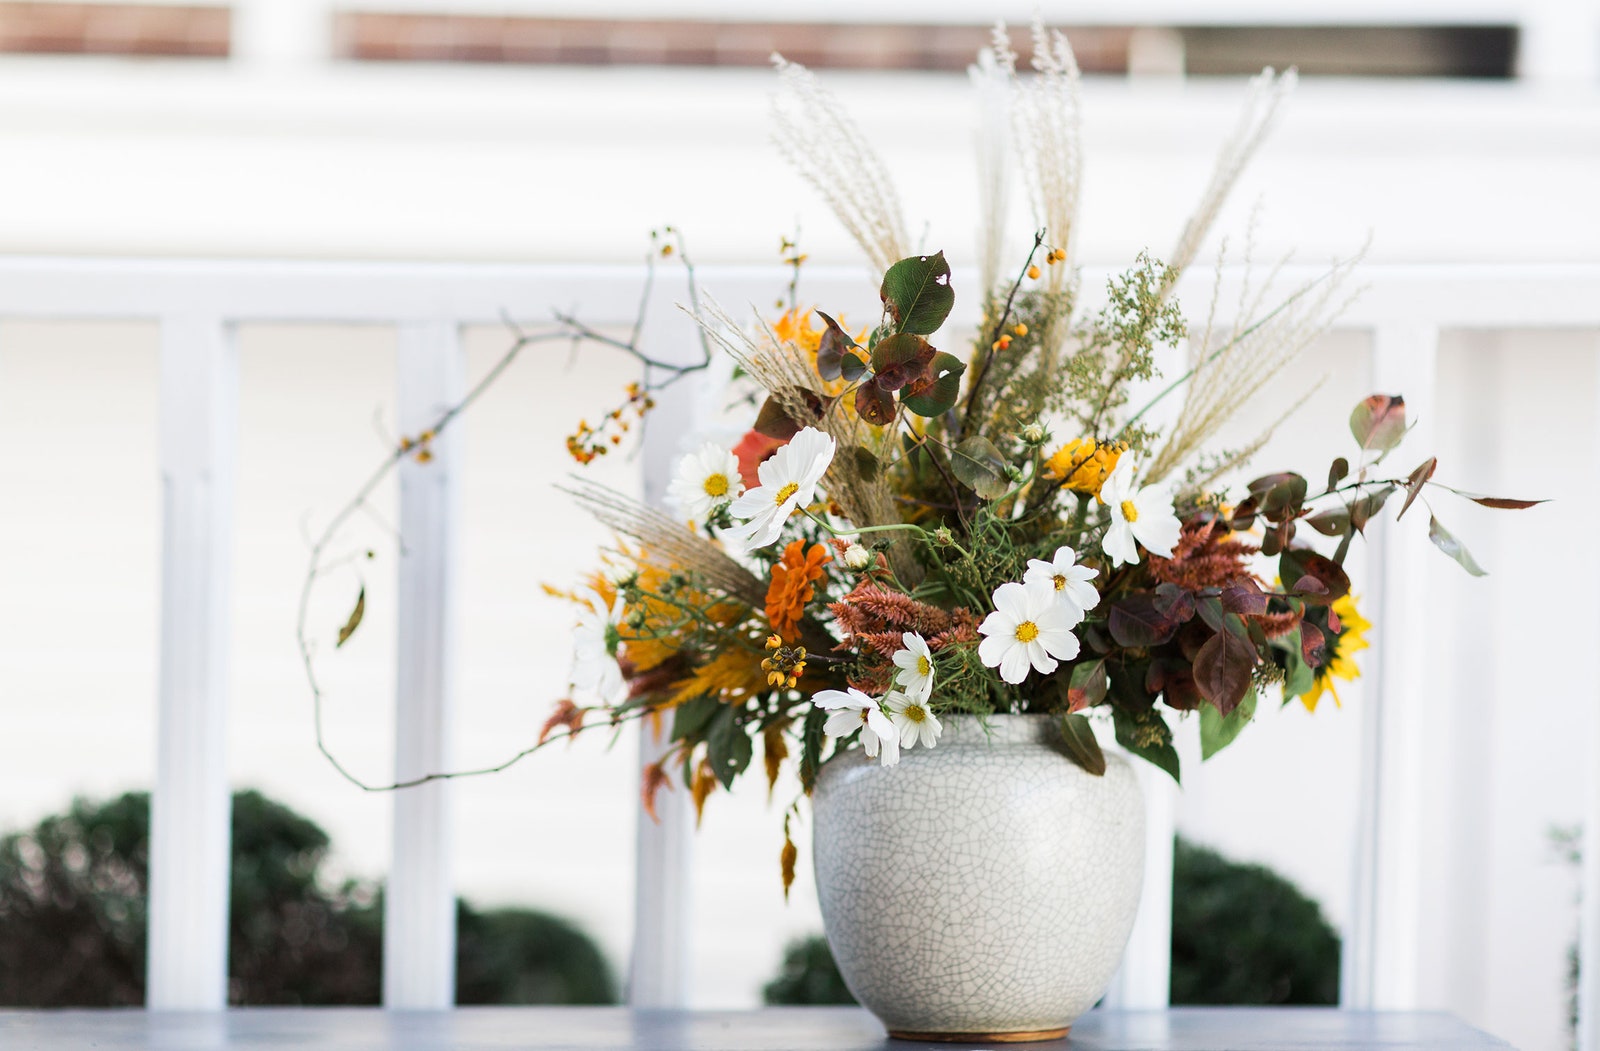 What Can I Use For Potted Floral Arrangements To Hold The Flowers